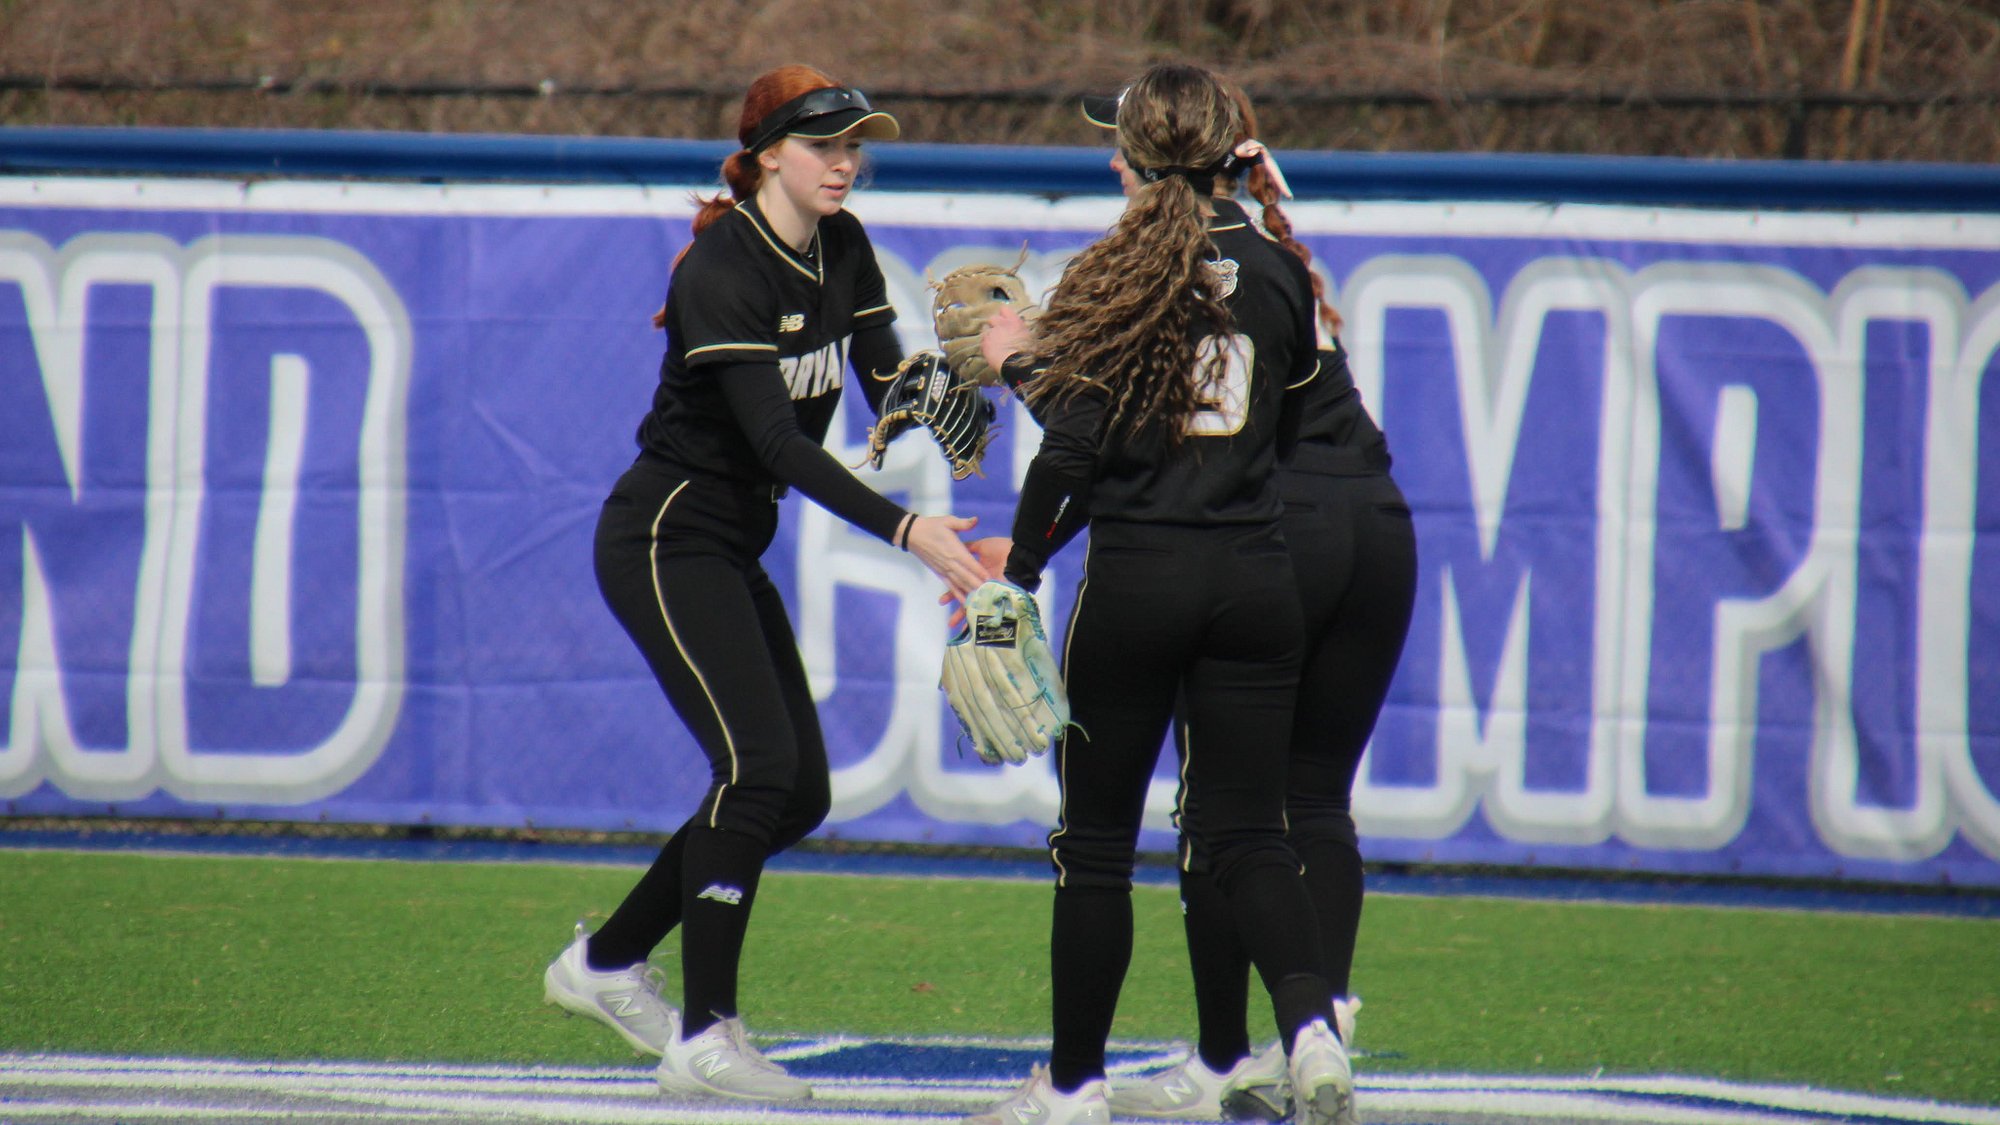 Bryant to face Yale on Tuesday in Doubleheader